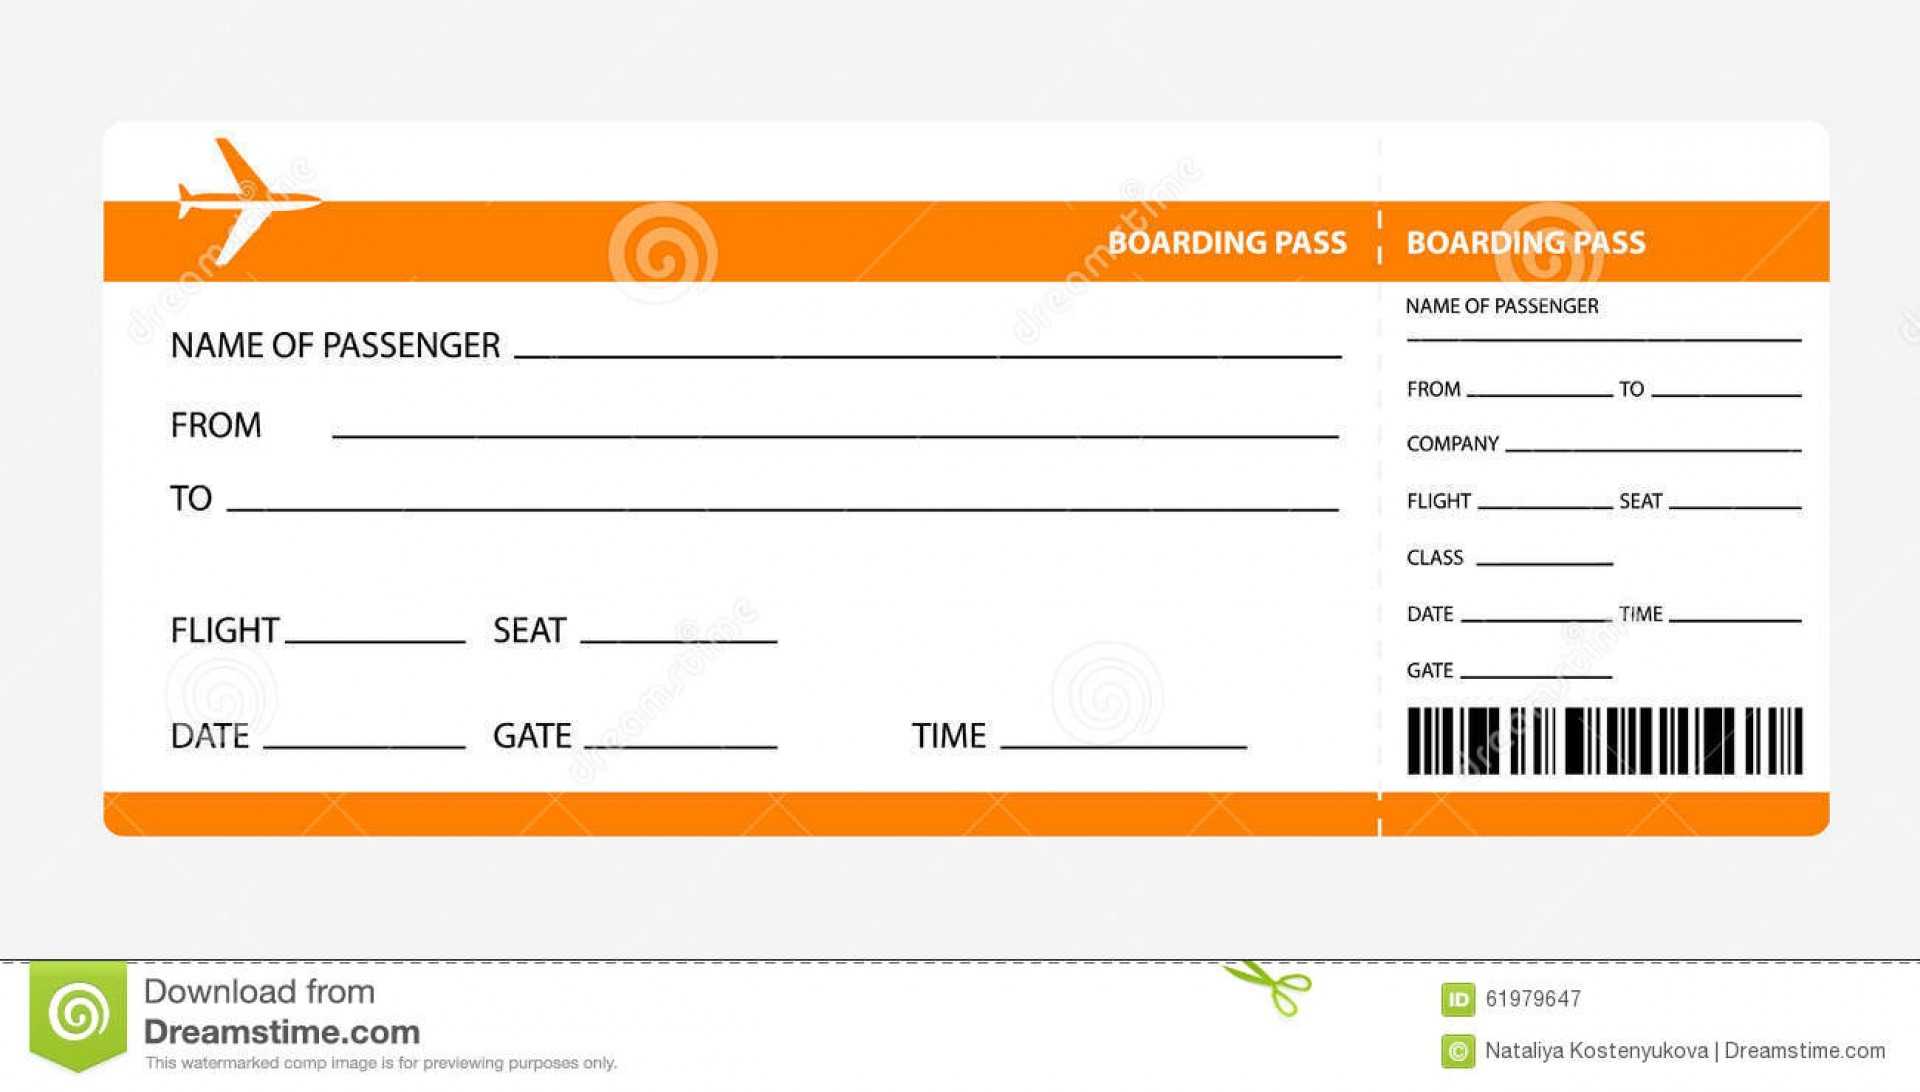 001 Free Plane Ticket Template Word Ideas Awesome Airline Inside Plane Ticket Template Word